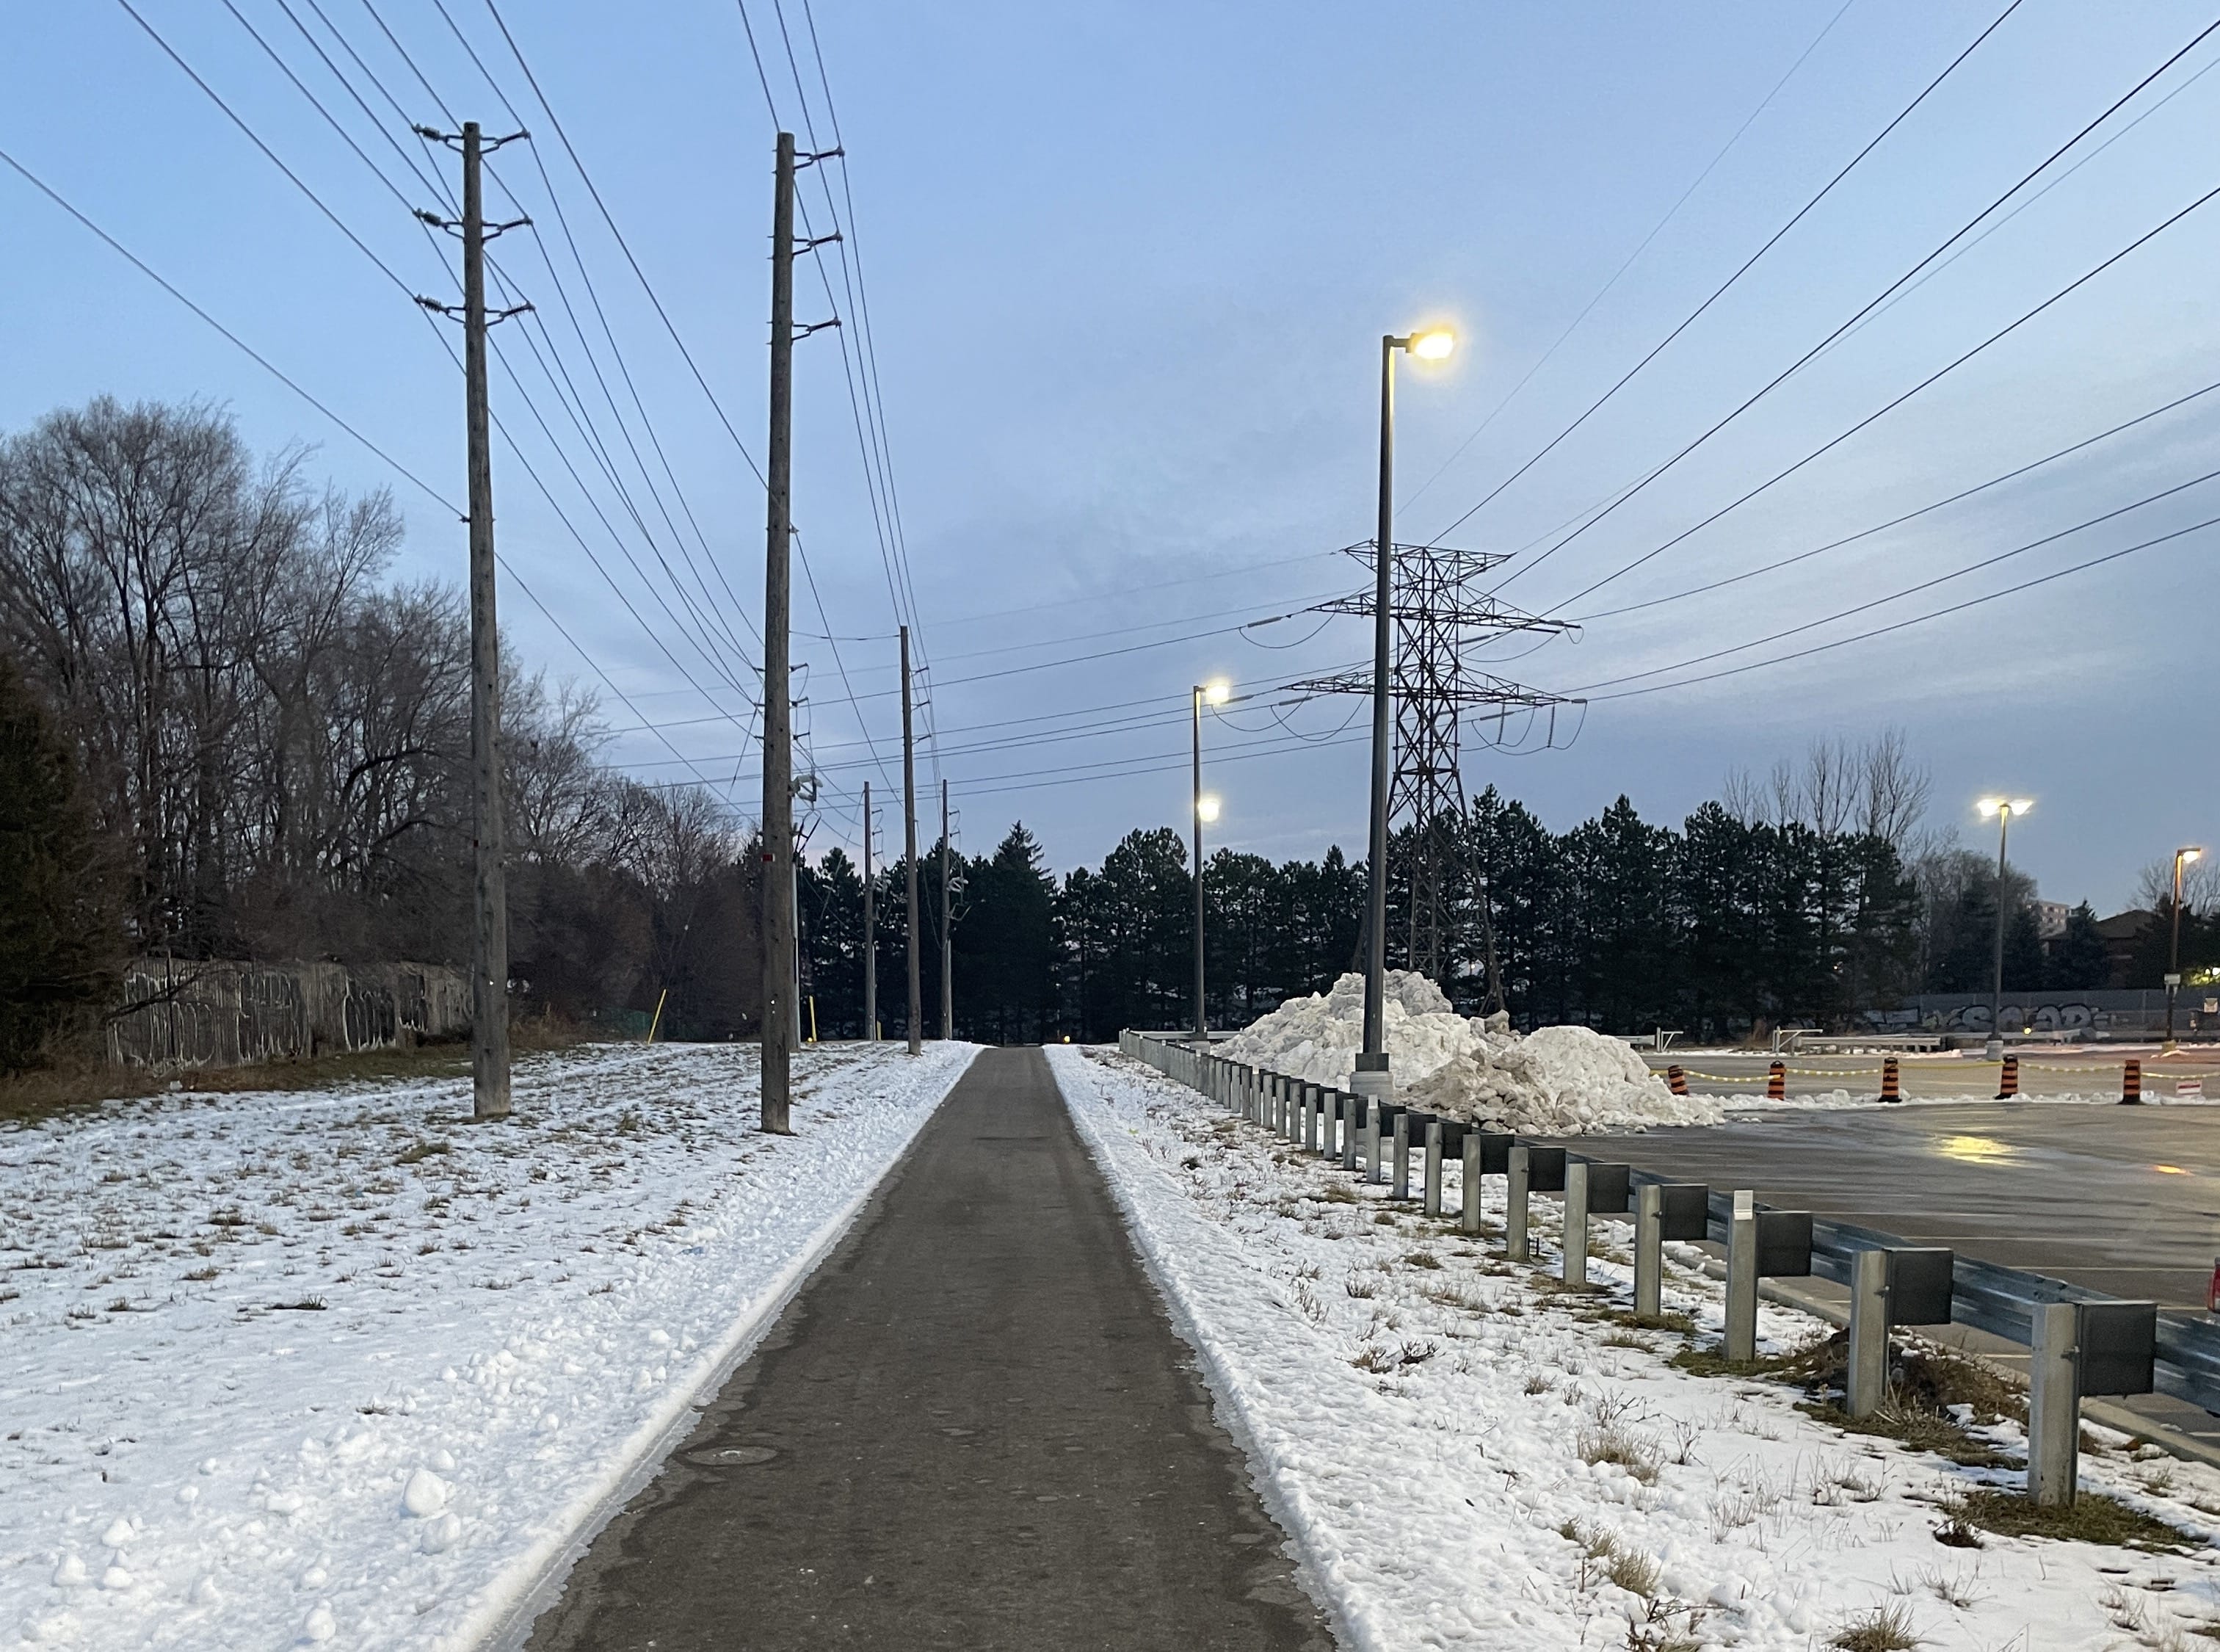 Early-morning photo of the trail near the Scarborough RT line. The black pavement is dry, clear, and visible. Power lines run overhead on both sides.